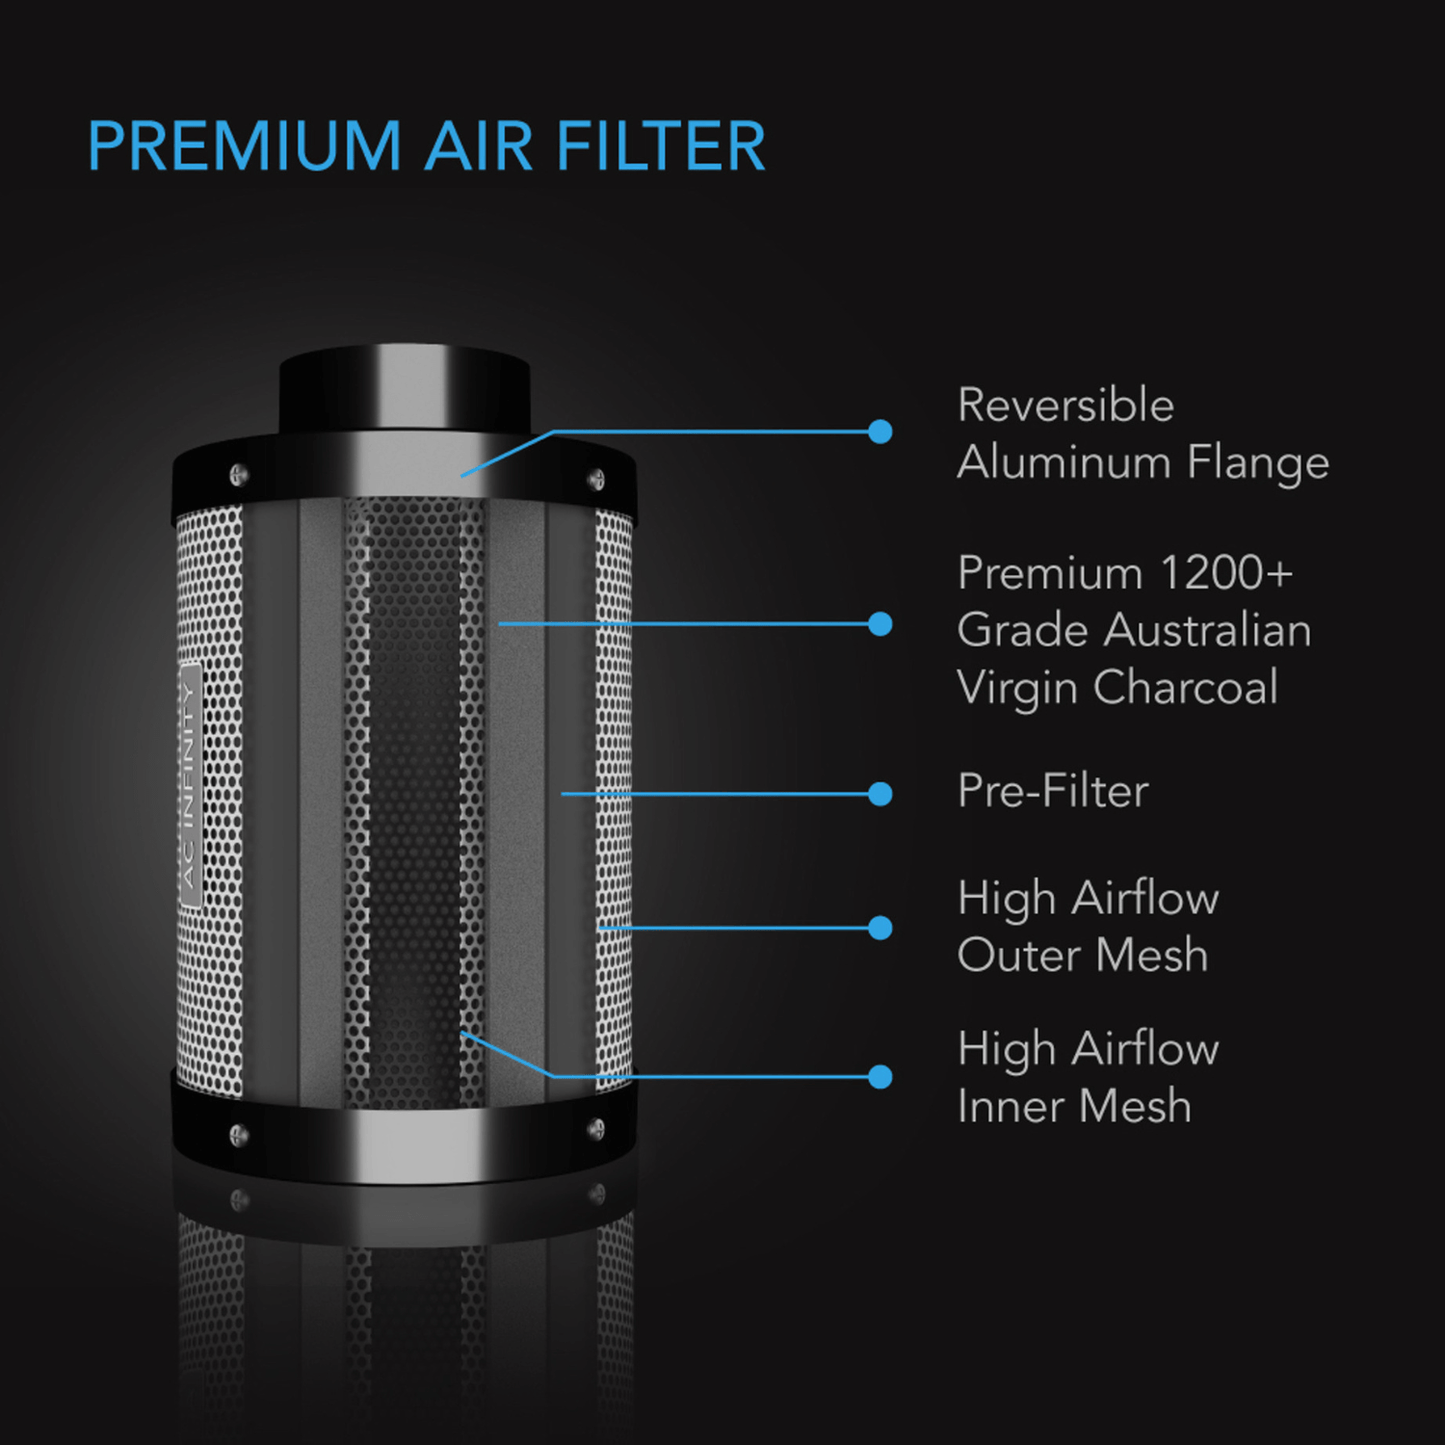 AC Infinity Air Filtration Kit 8", Inline Fan with Speed Controller, Carbon Filter & Ducting Combo AC-FKS8 Ventilation